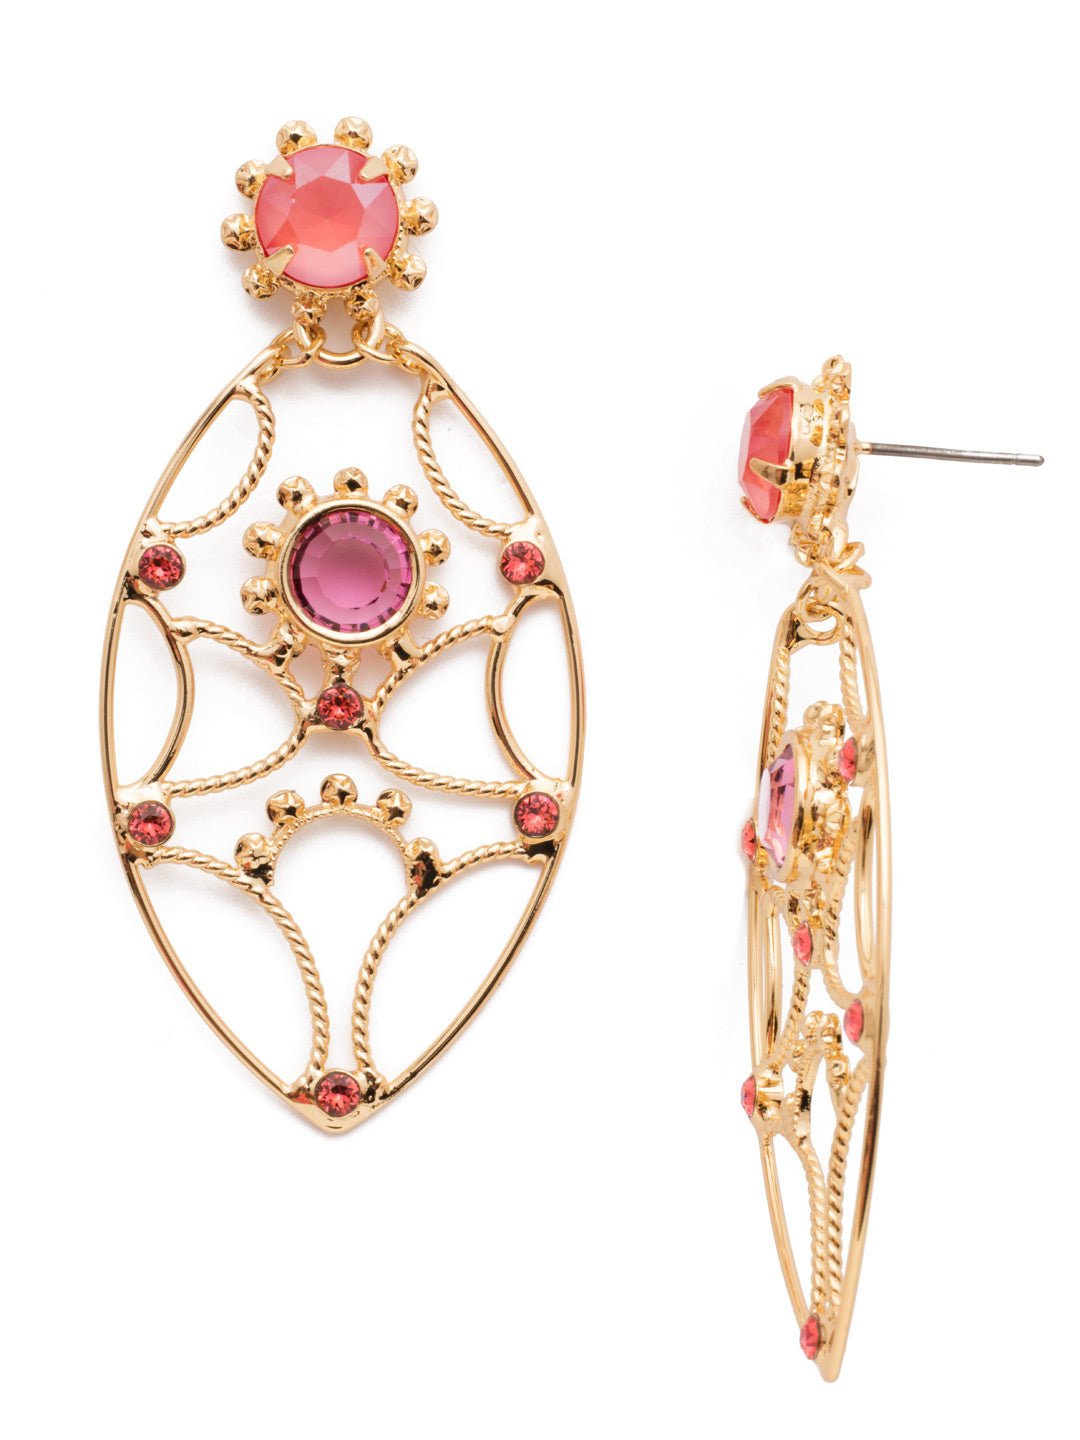 Mabel Statement Earring - EES70BGBGA - The Mabel Statement Earrings are abstract stunners. Their basic shape is elevated with hand-soldered metalwork, assorted gems and sparkling crystals. From Sorrelli's Begonia collection in our Bright Gold-tone finish.